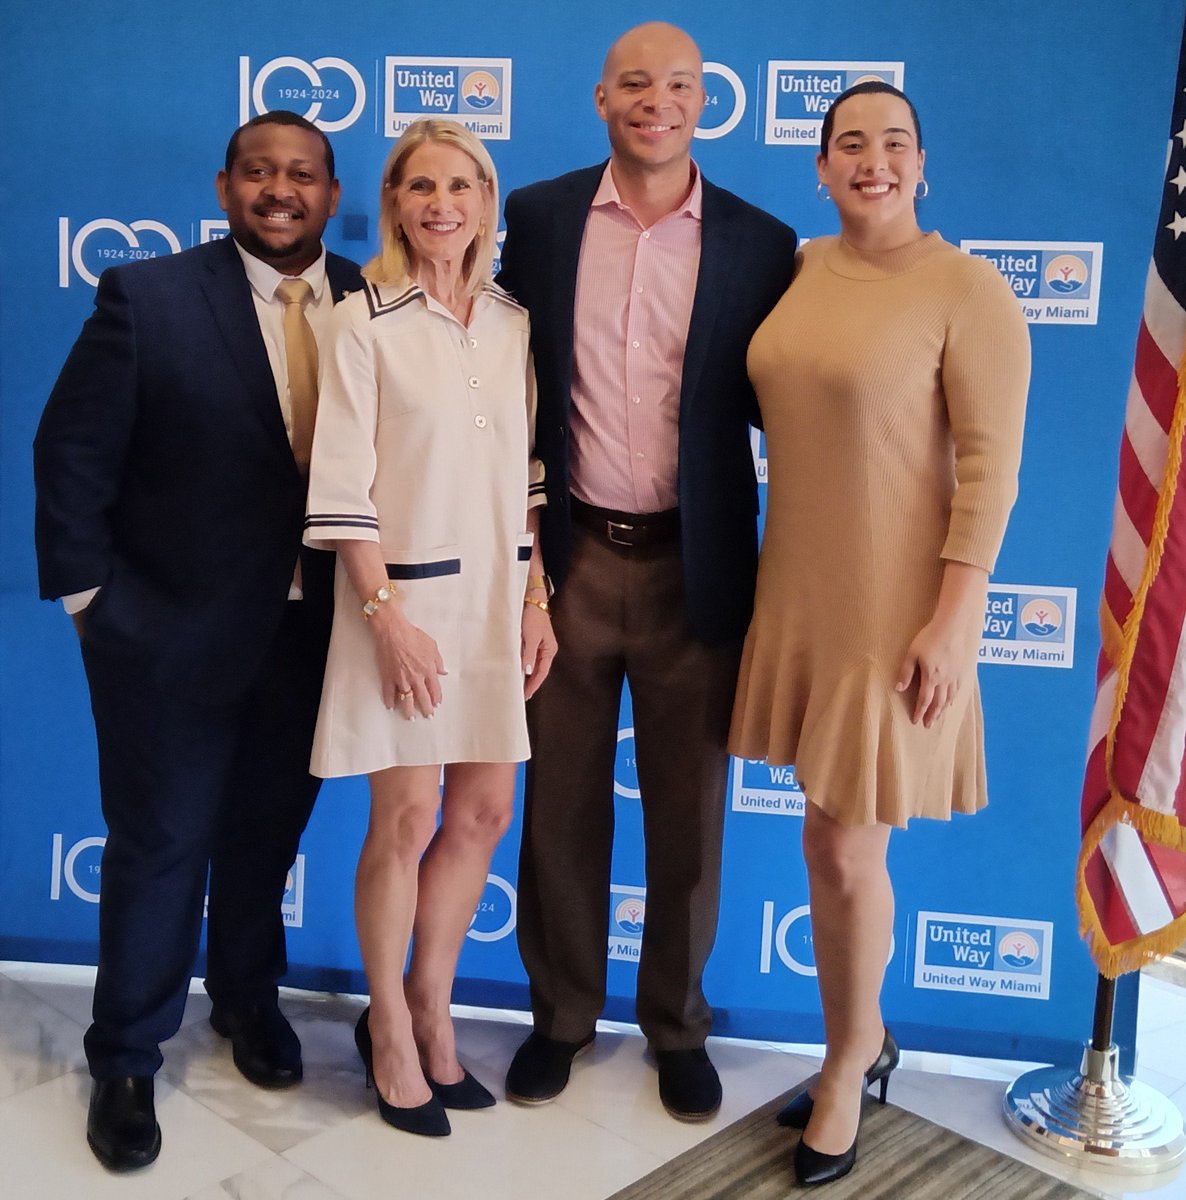 At today's legislative recap with @UnitedWayMiami, I spoke with Sen. @AlexisMCalatayu, @RepChambliss, & Rep. @vickillopez about @fji_law's efforts in criminal justice reform and ending the criminalization of homelessness. Looking forward to working with them next session.